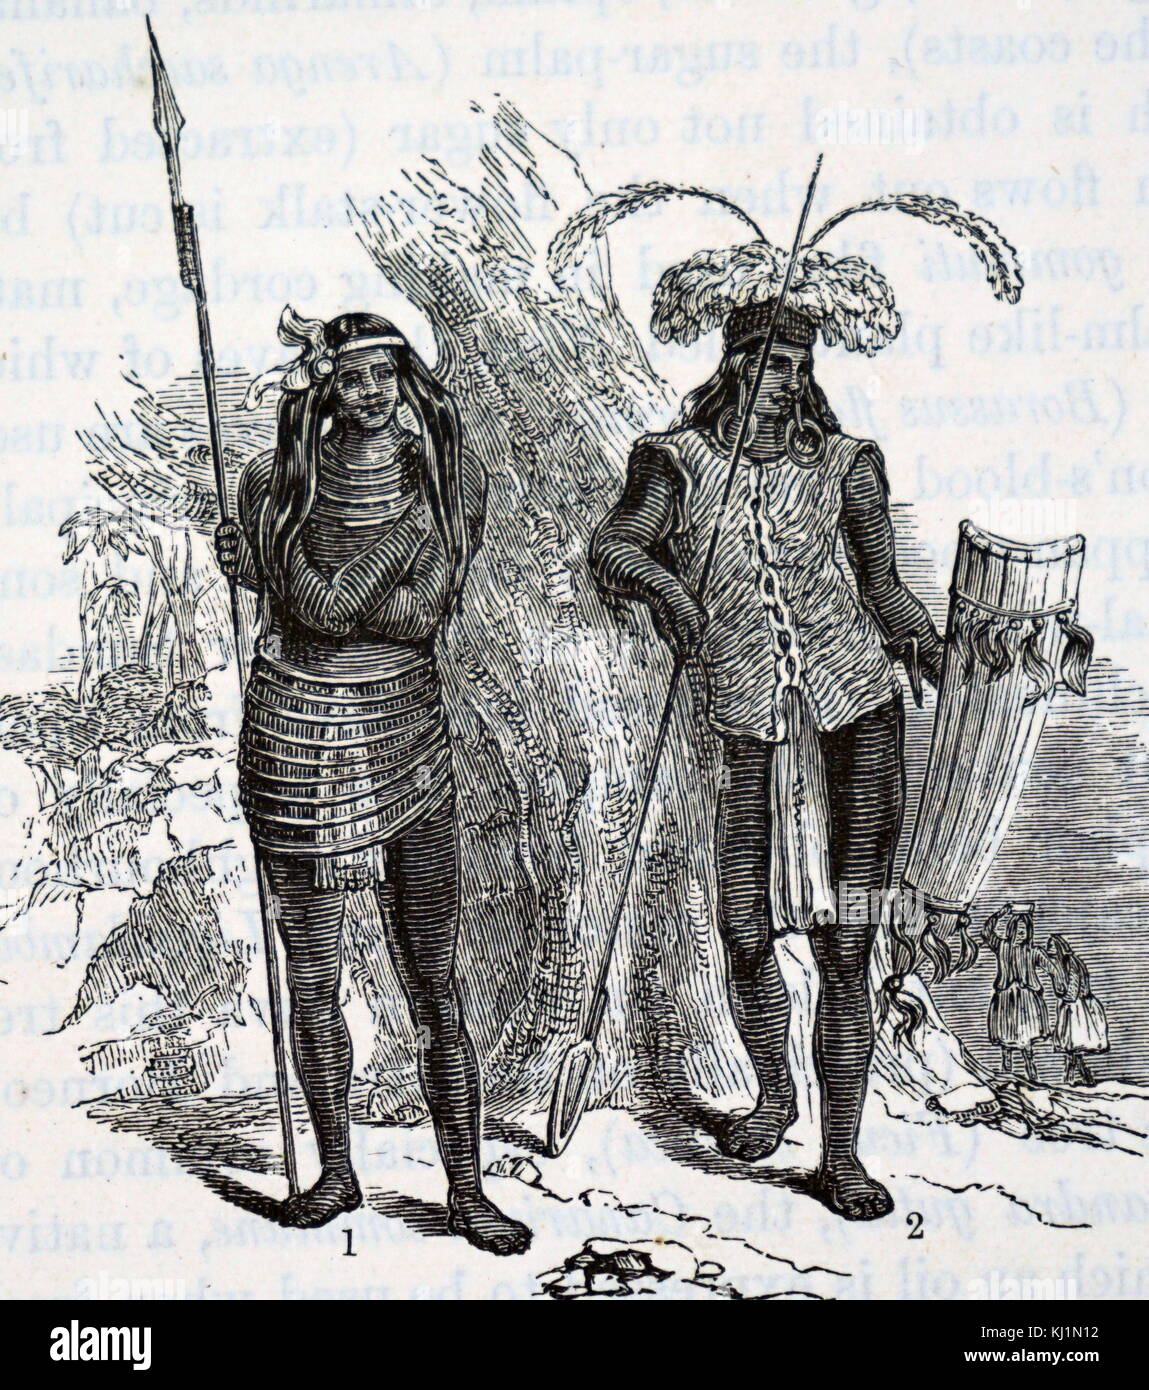 Engraving depicting Dayak males performing daily tasks. A Dayak is a member of a group of indigenous peoples inhabiting parts of Borneo. Dated 19th Century Stock Photo